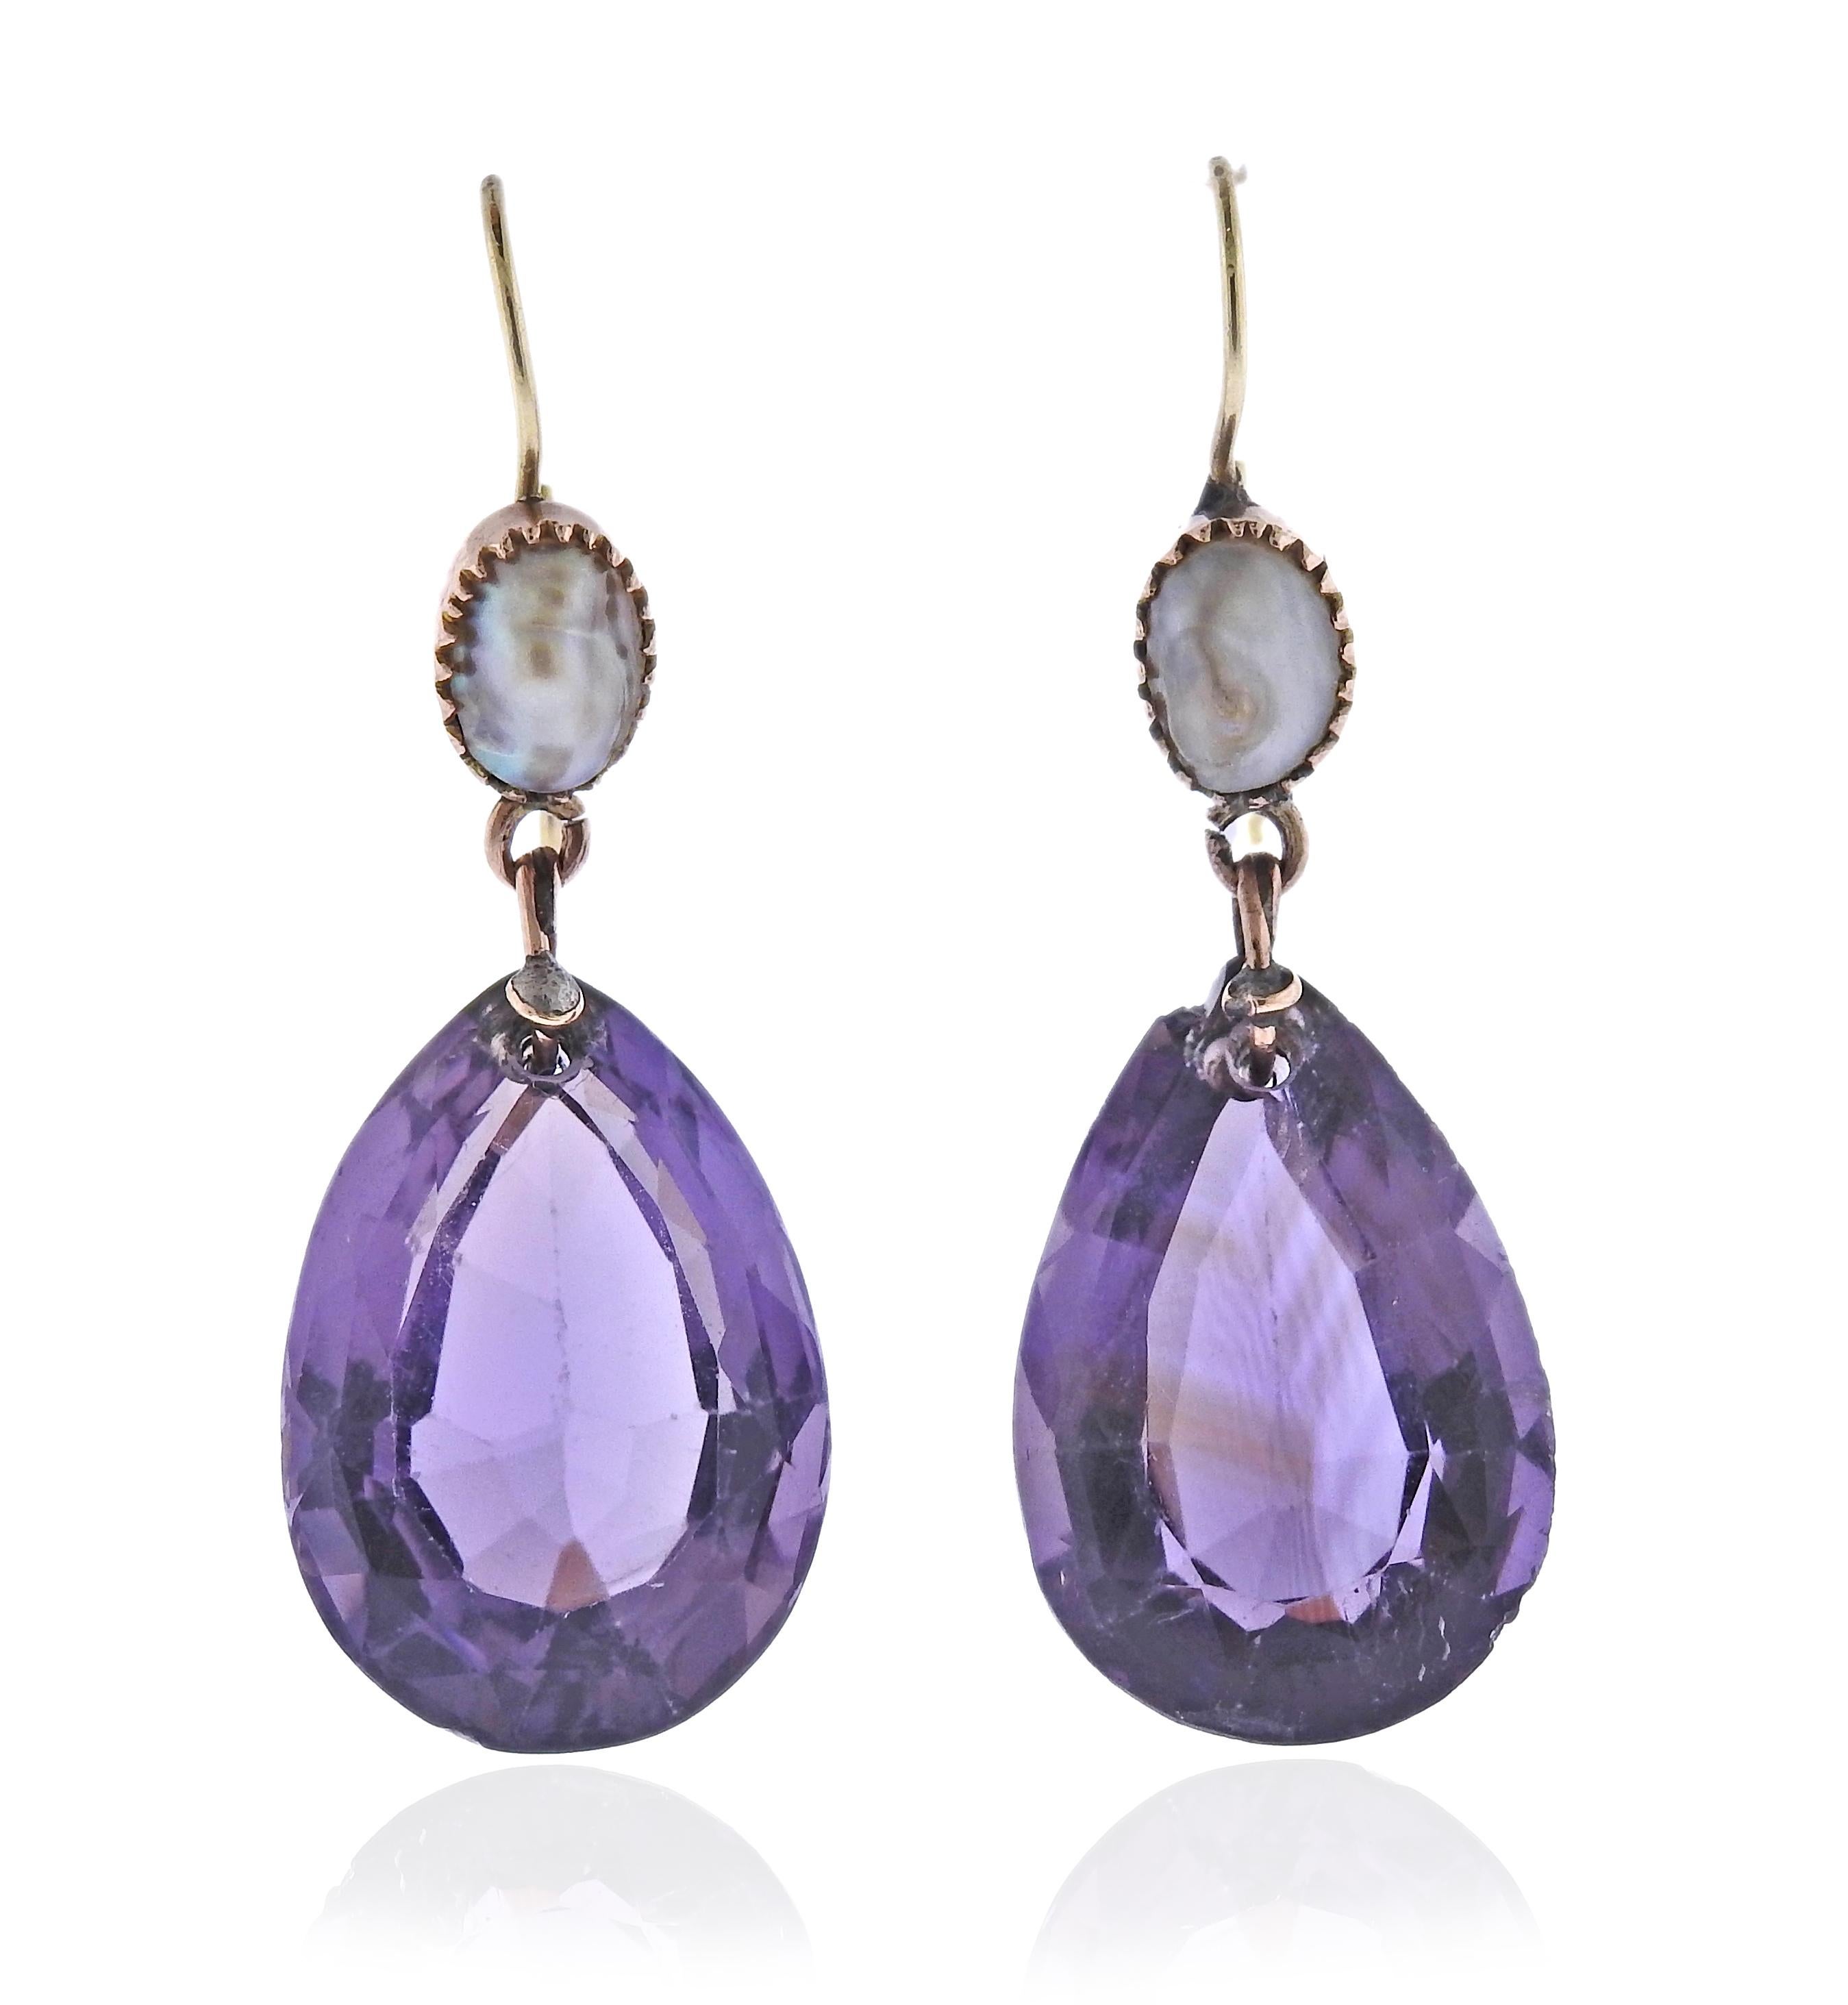 Pair of 14k gold drop earrings, with amethysts (stones are chipped) and pearls. Earrings are 39mm long. Weigh 6.4 grams.